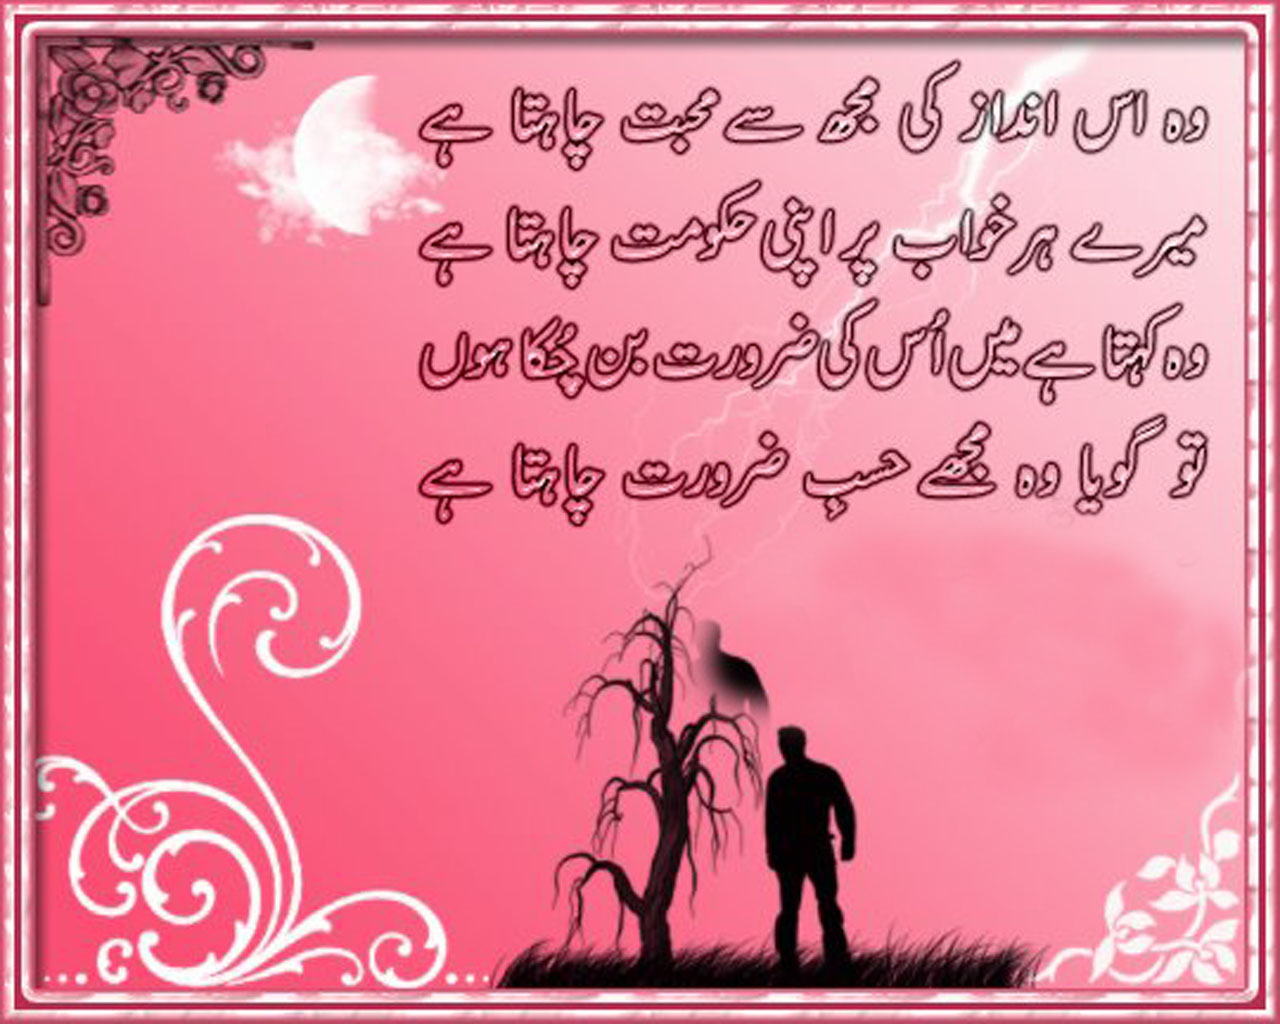 Sad New Year Love Poems Love poems urdu poetry images english